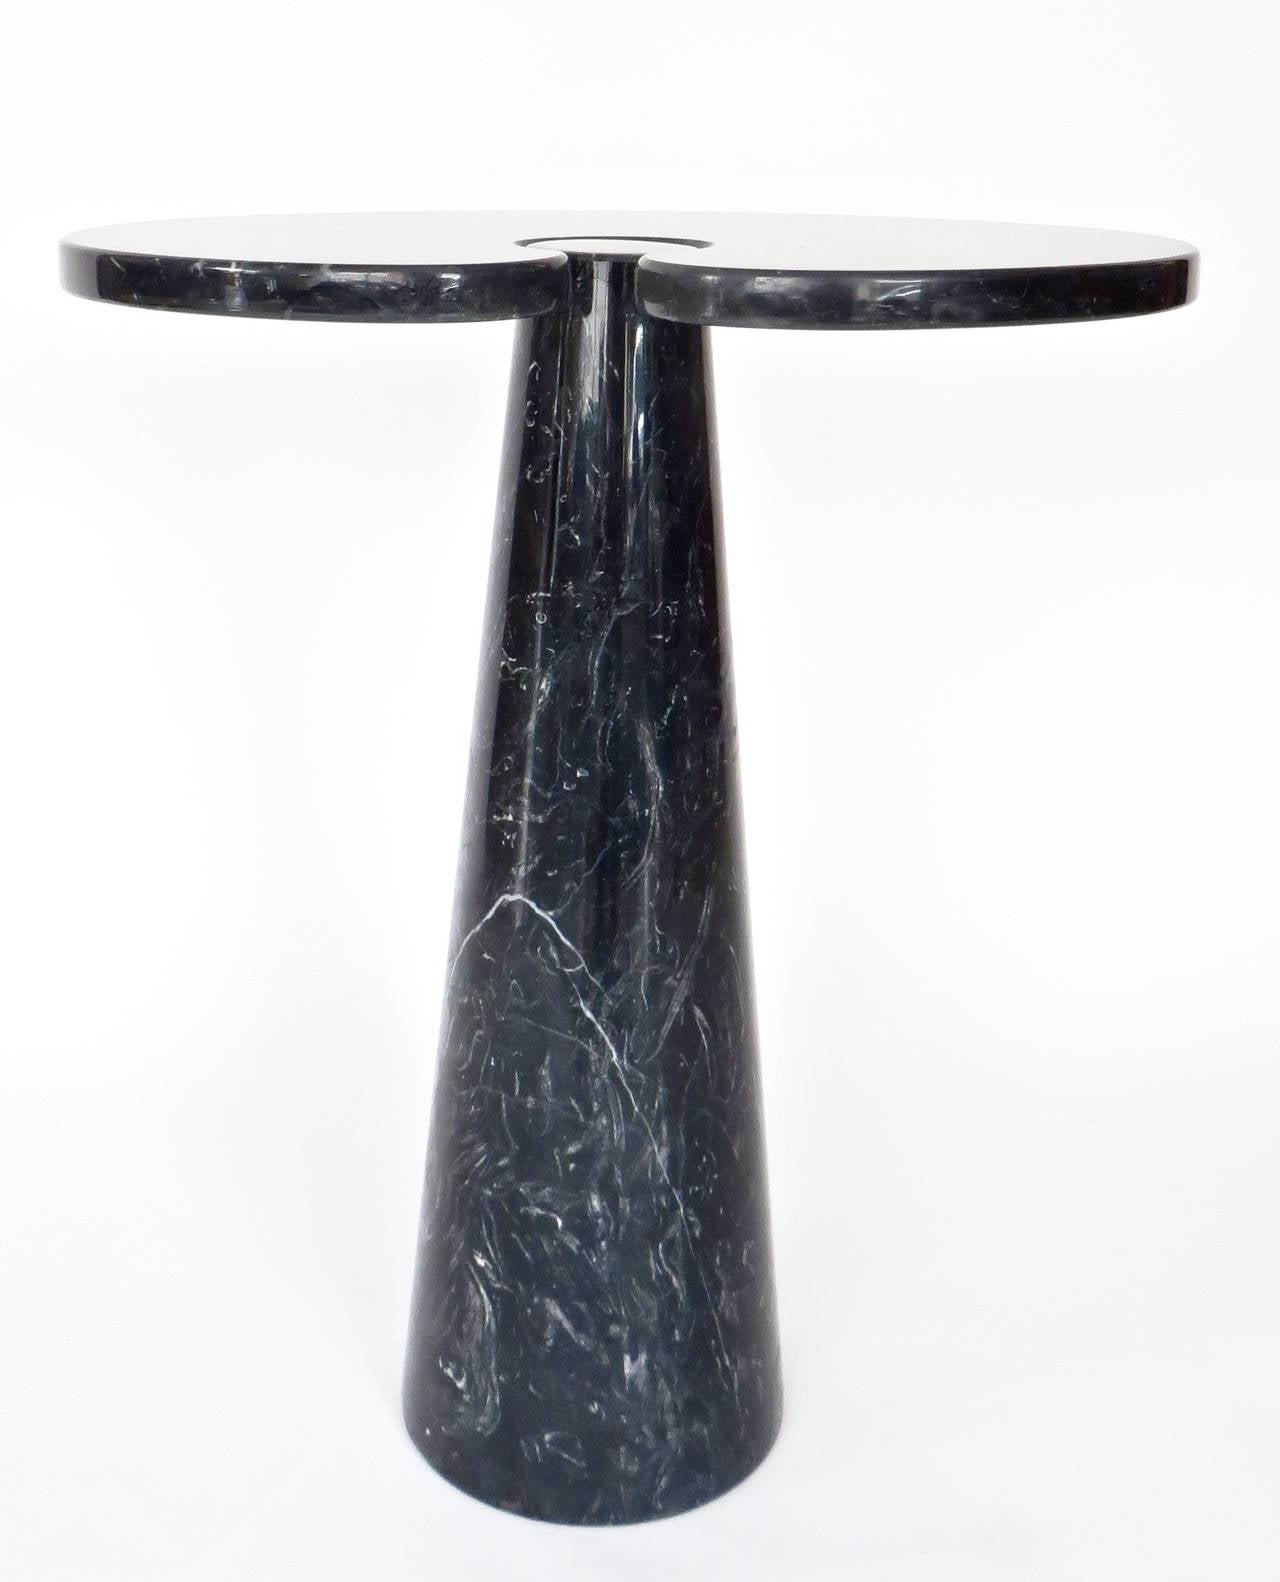 Italian Angelo Mangiarotti vintage tall Eros side table in Marquina Nero marble.
Skipper Series. 1971.
Beautiful black Mangiarotti table with nice veining, no chips or restorations. 
There are reflections in some of the photos of the photo